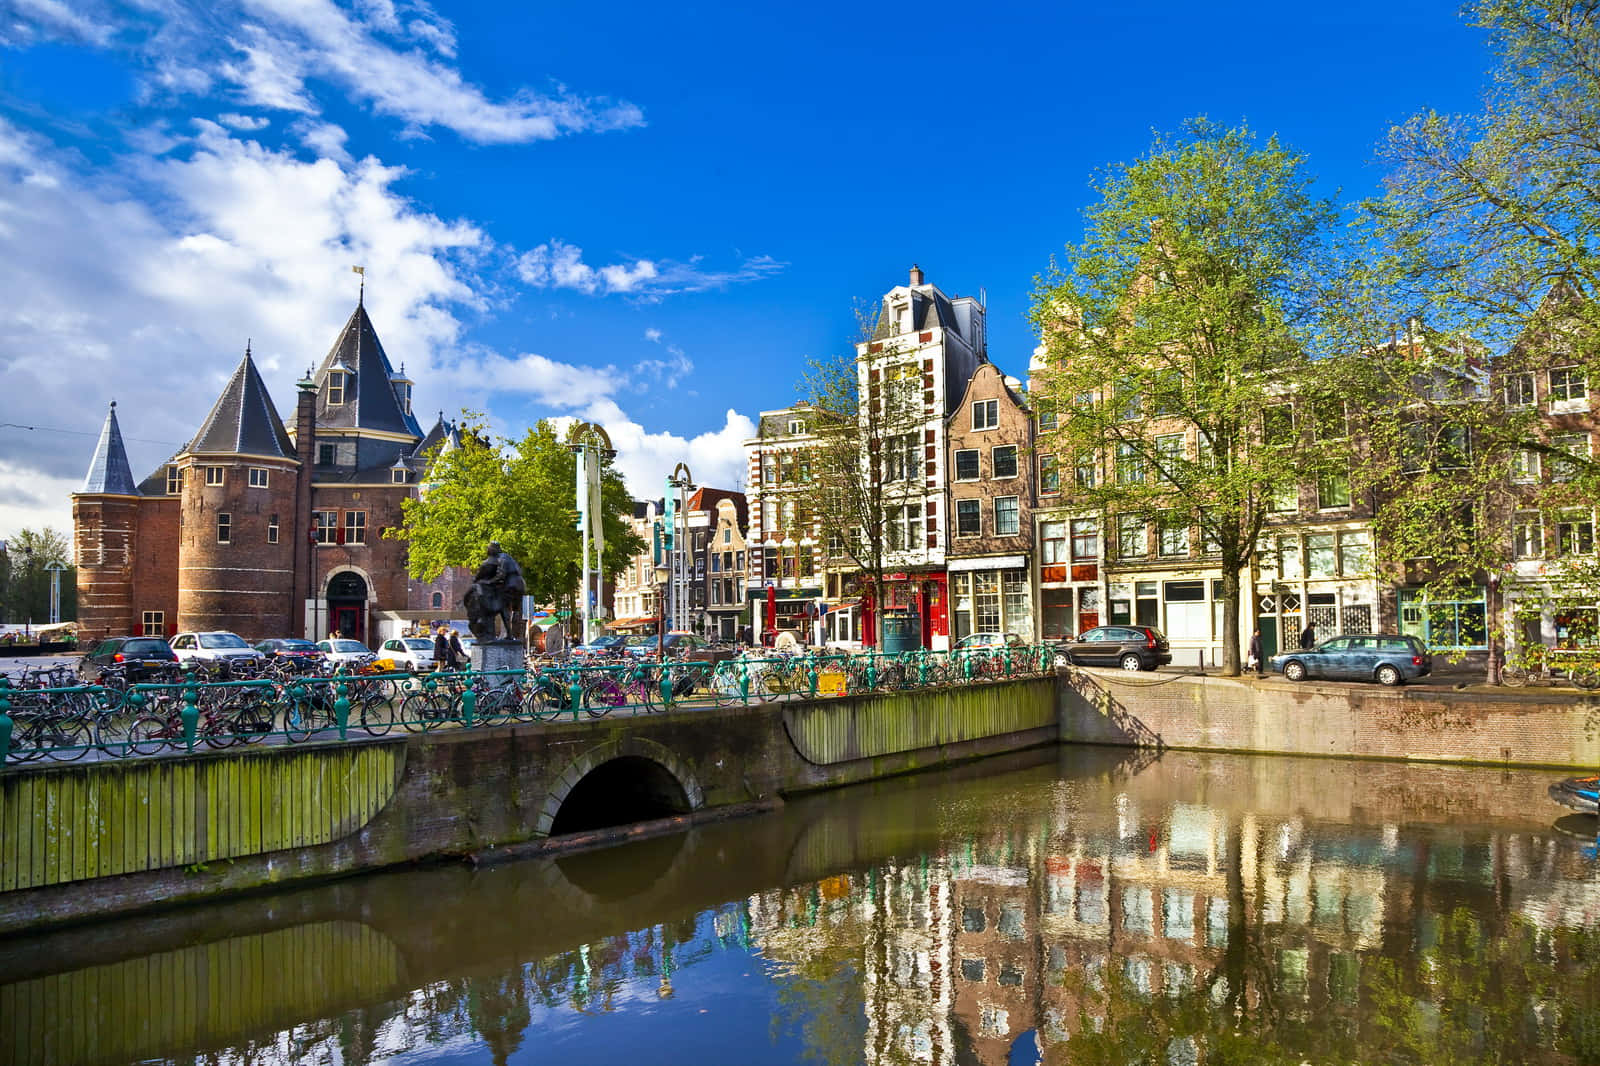 Dream better by exploring the breathtaking countryside of the Netherlands.